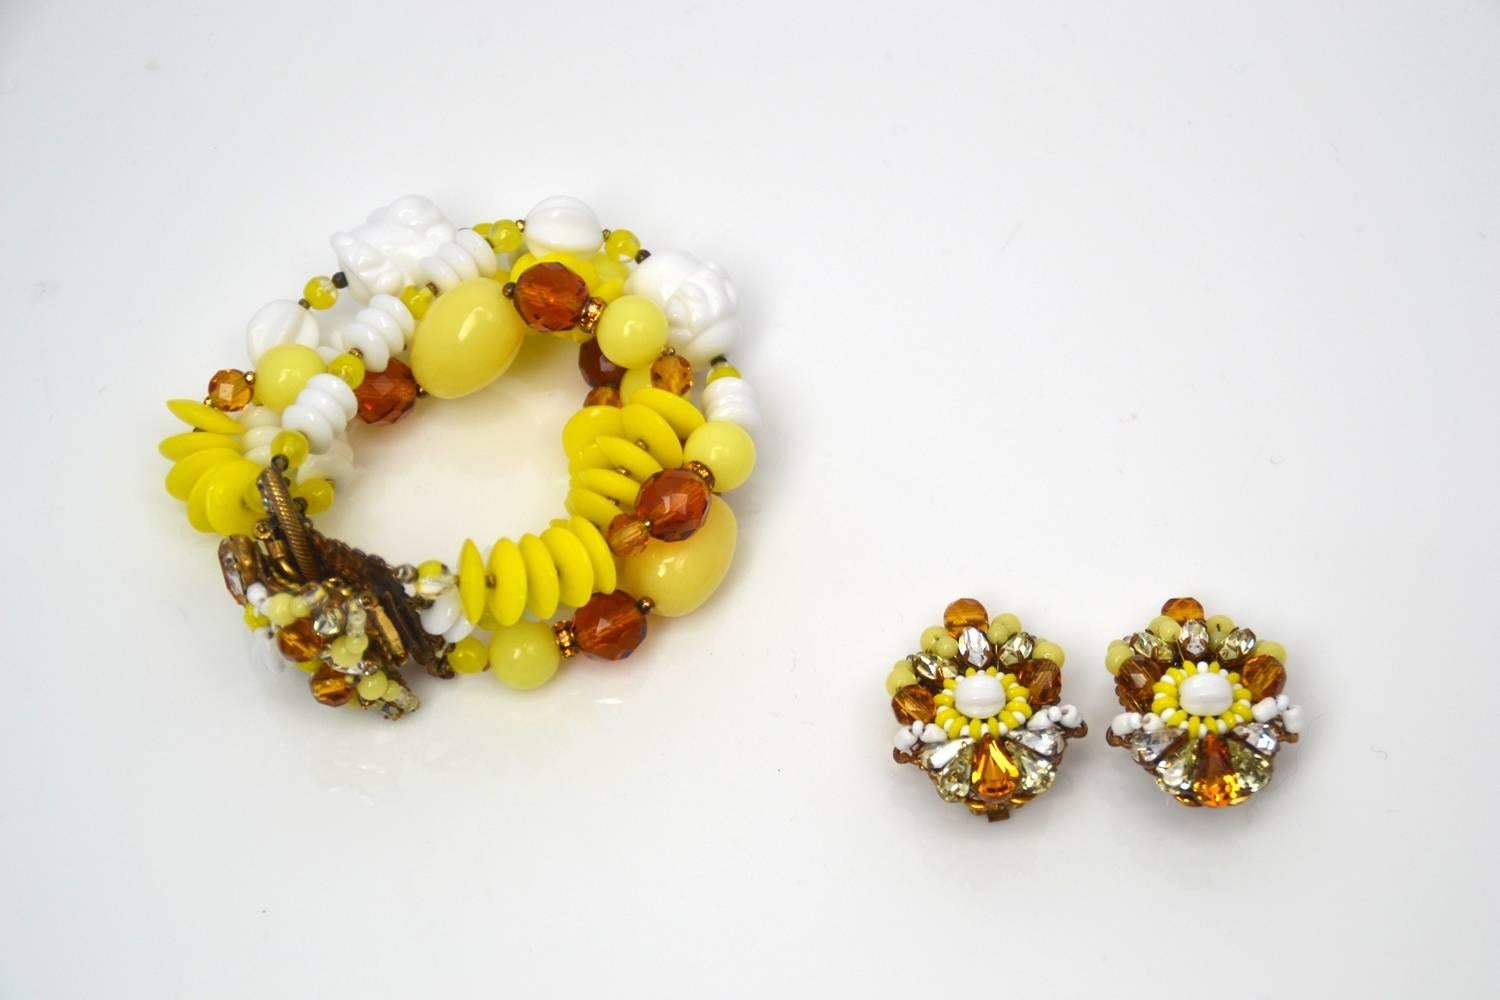 Eclectic, vibrant and vintage. Designed by Eugene Schultz in the 1950's, this demi parure has yellow, white and burnt orange glass beading with coordinating rhinestones. Earring beads and stones are set in a gold-tone filigree setting. Bracelet has